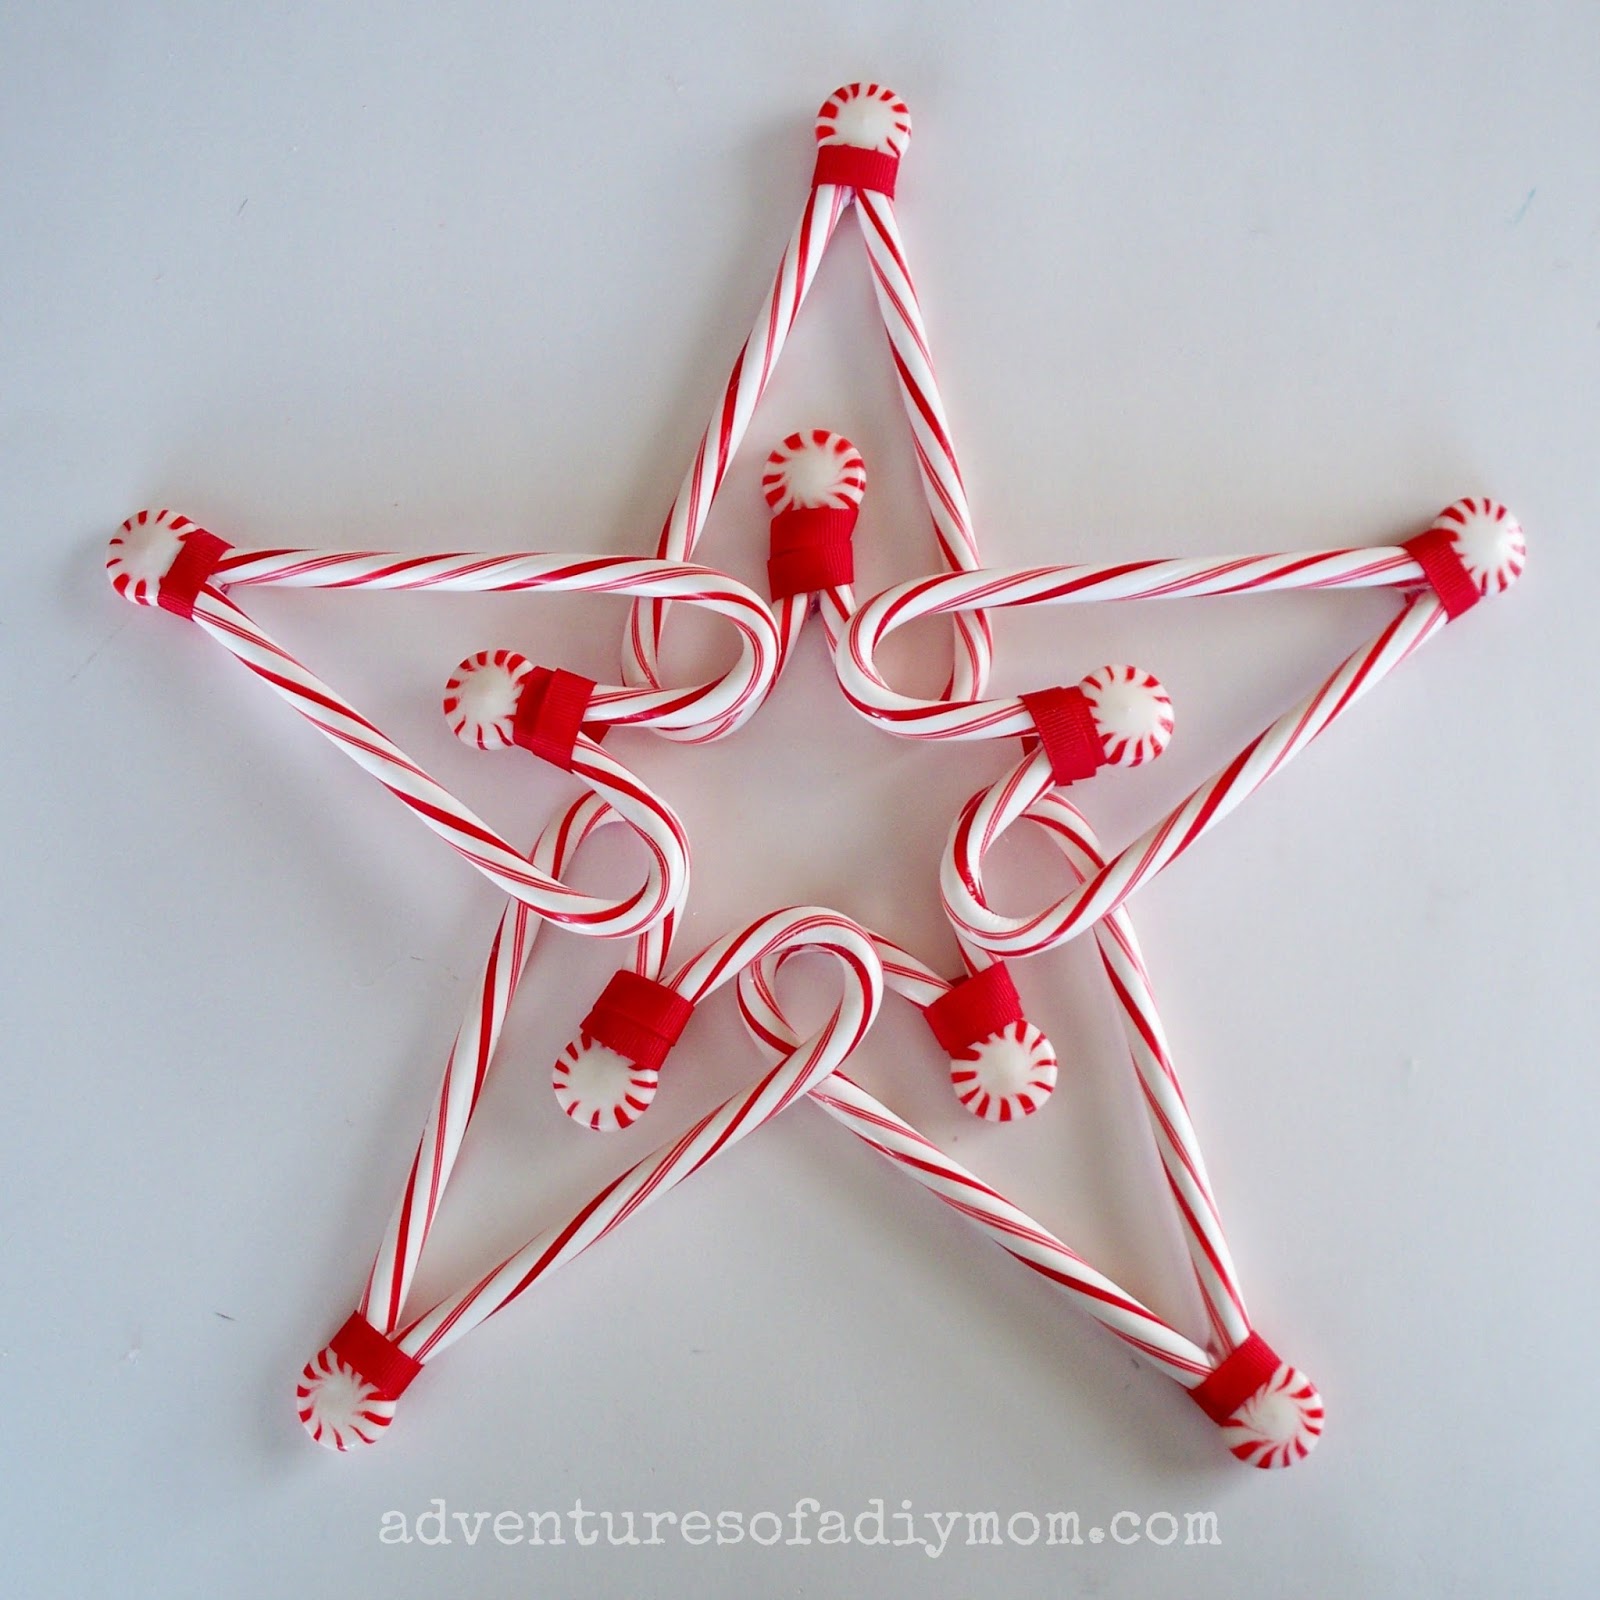 How to Make a Candy Cane Star Tree Topper - Adventures of a DIY Mom